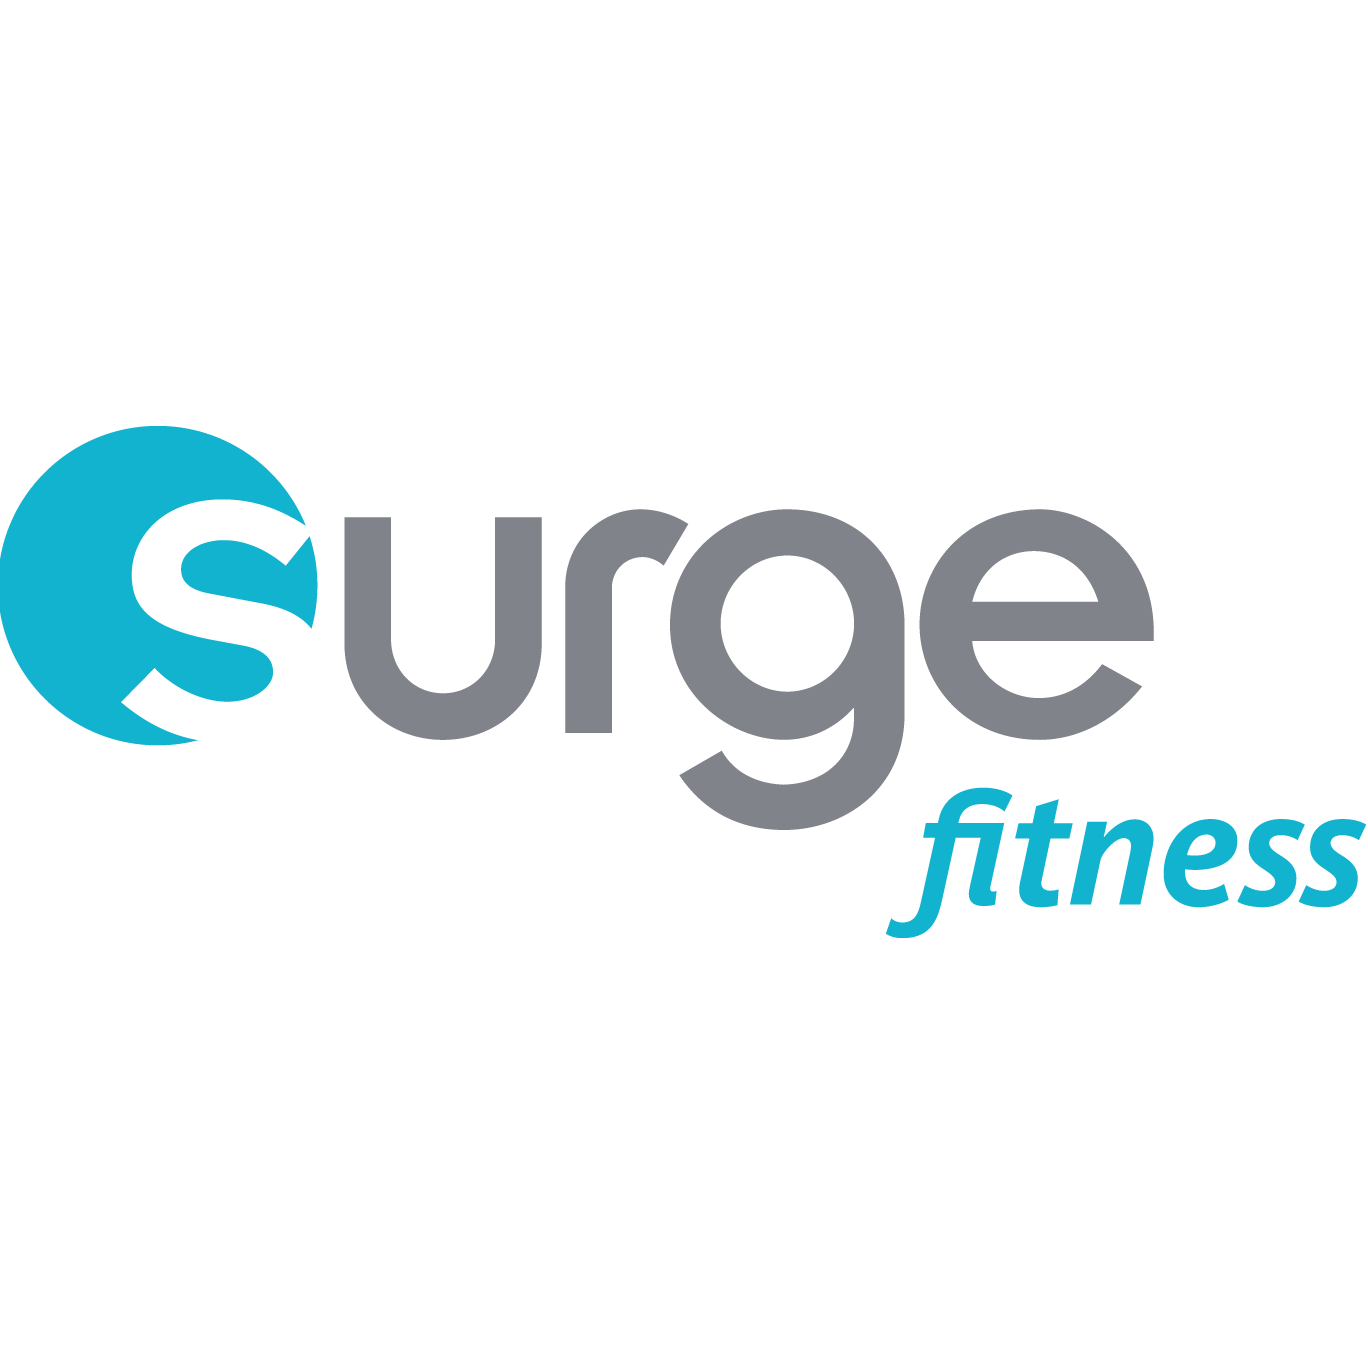 surge-fitness-logo.png